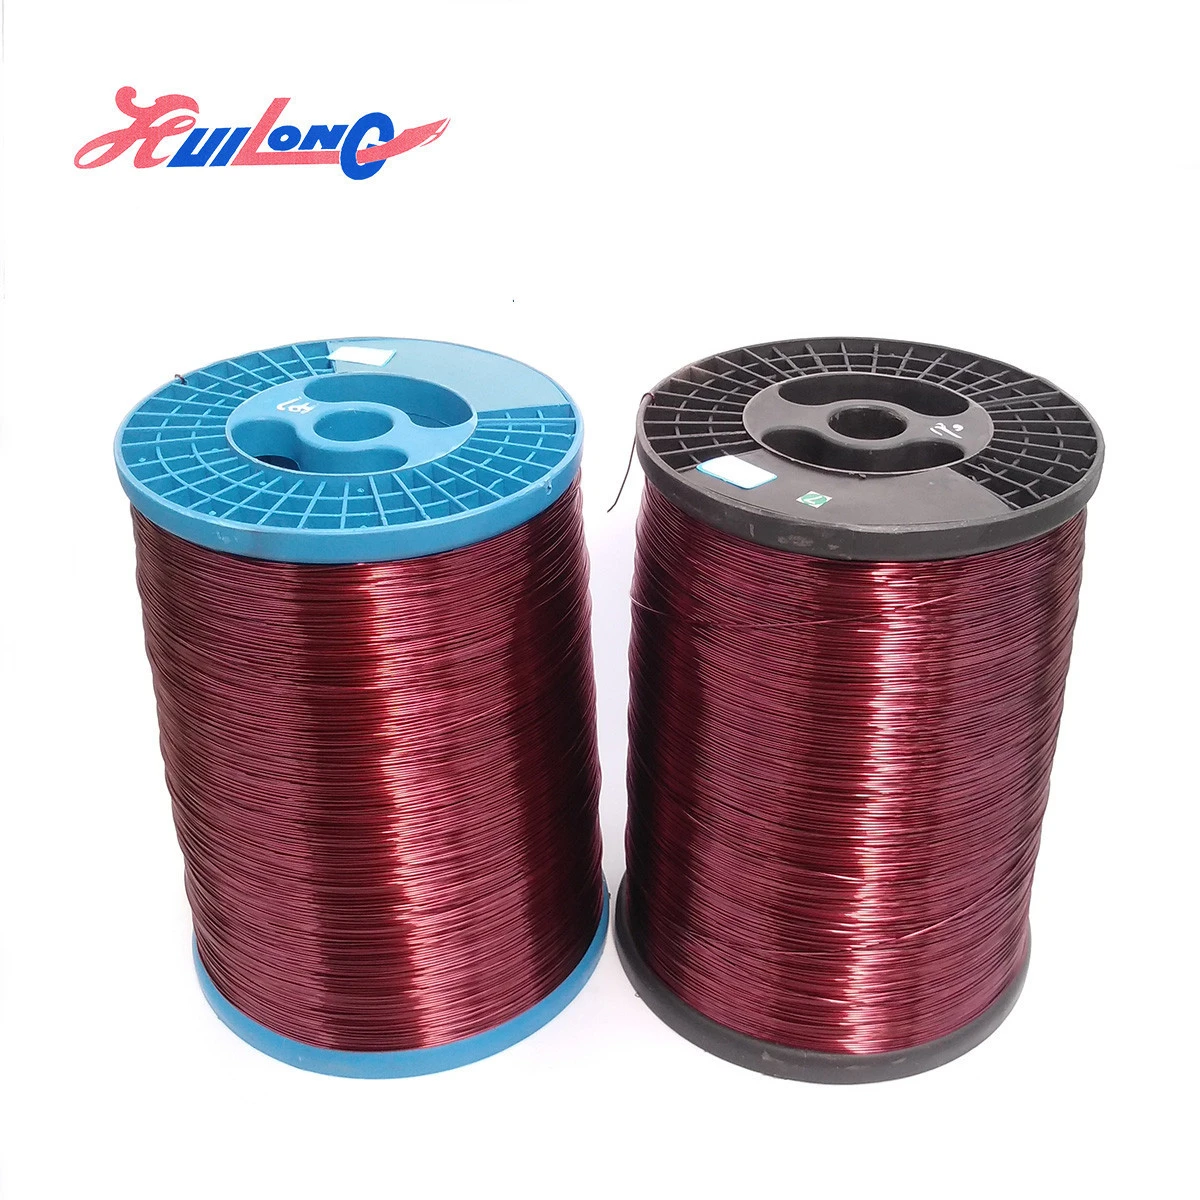 0.2mm 5.0mm enameled round aluminum magnet wire/cable for sizes